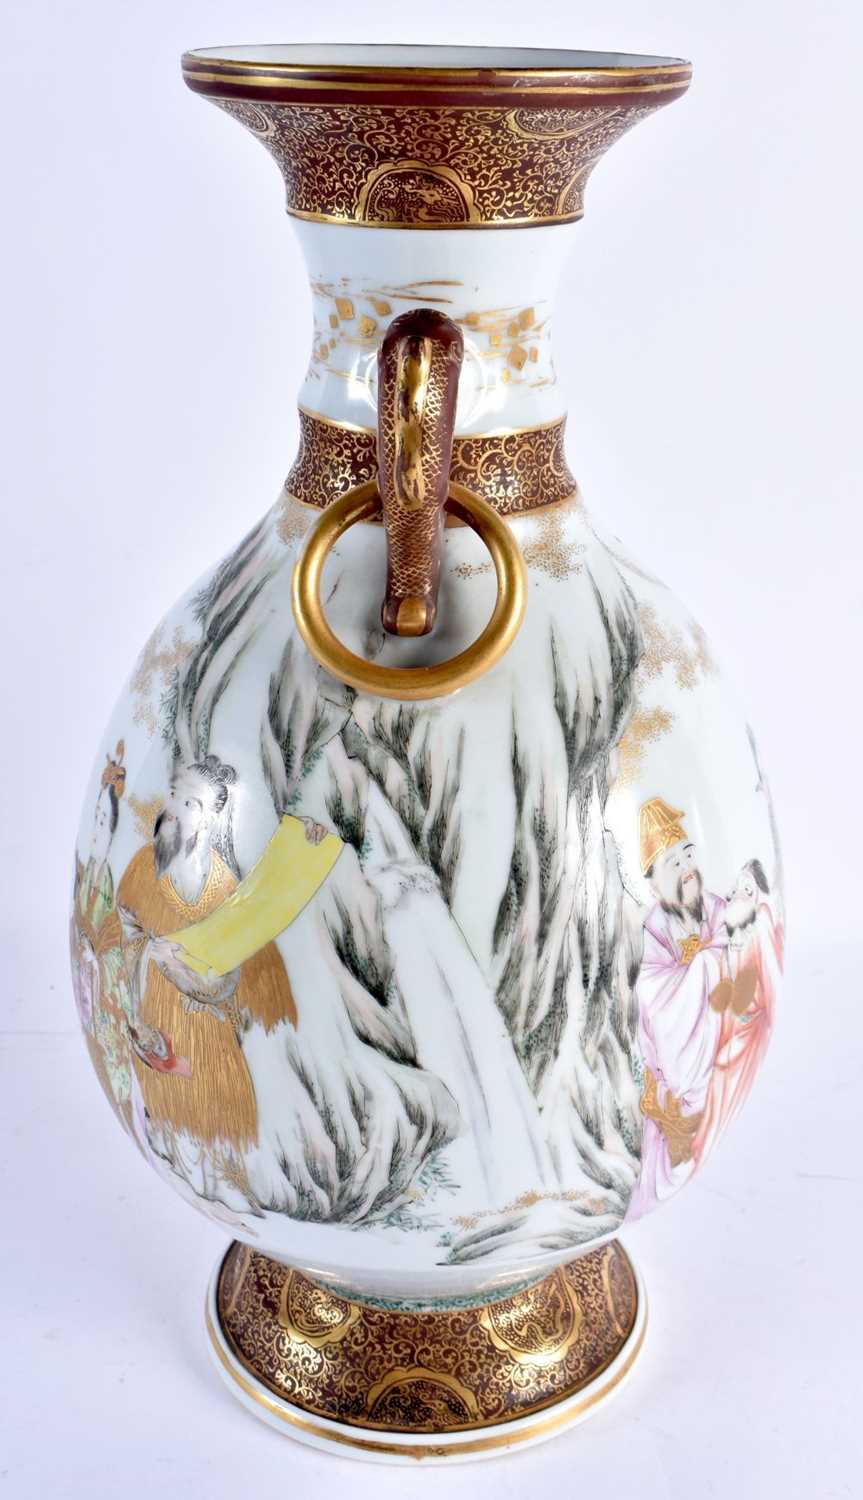 A LARGE 19TH CENTURY JAPANESE MEIJI PERIOD TWIN HANDLED KUTANI PORCELAIN VASE painted with figures - Image 6 of 21